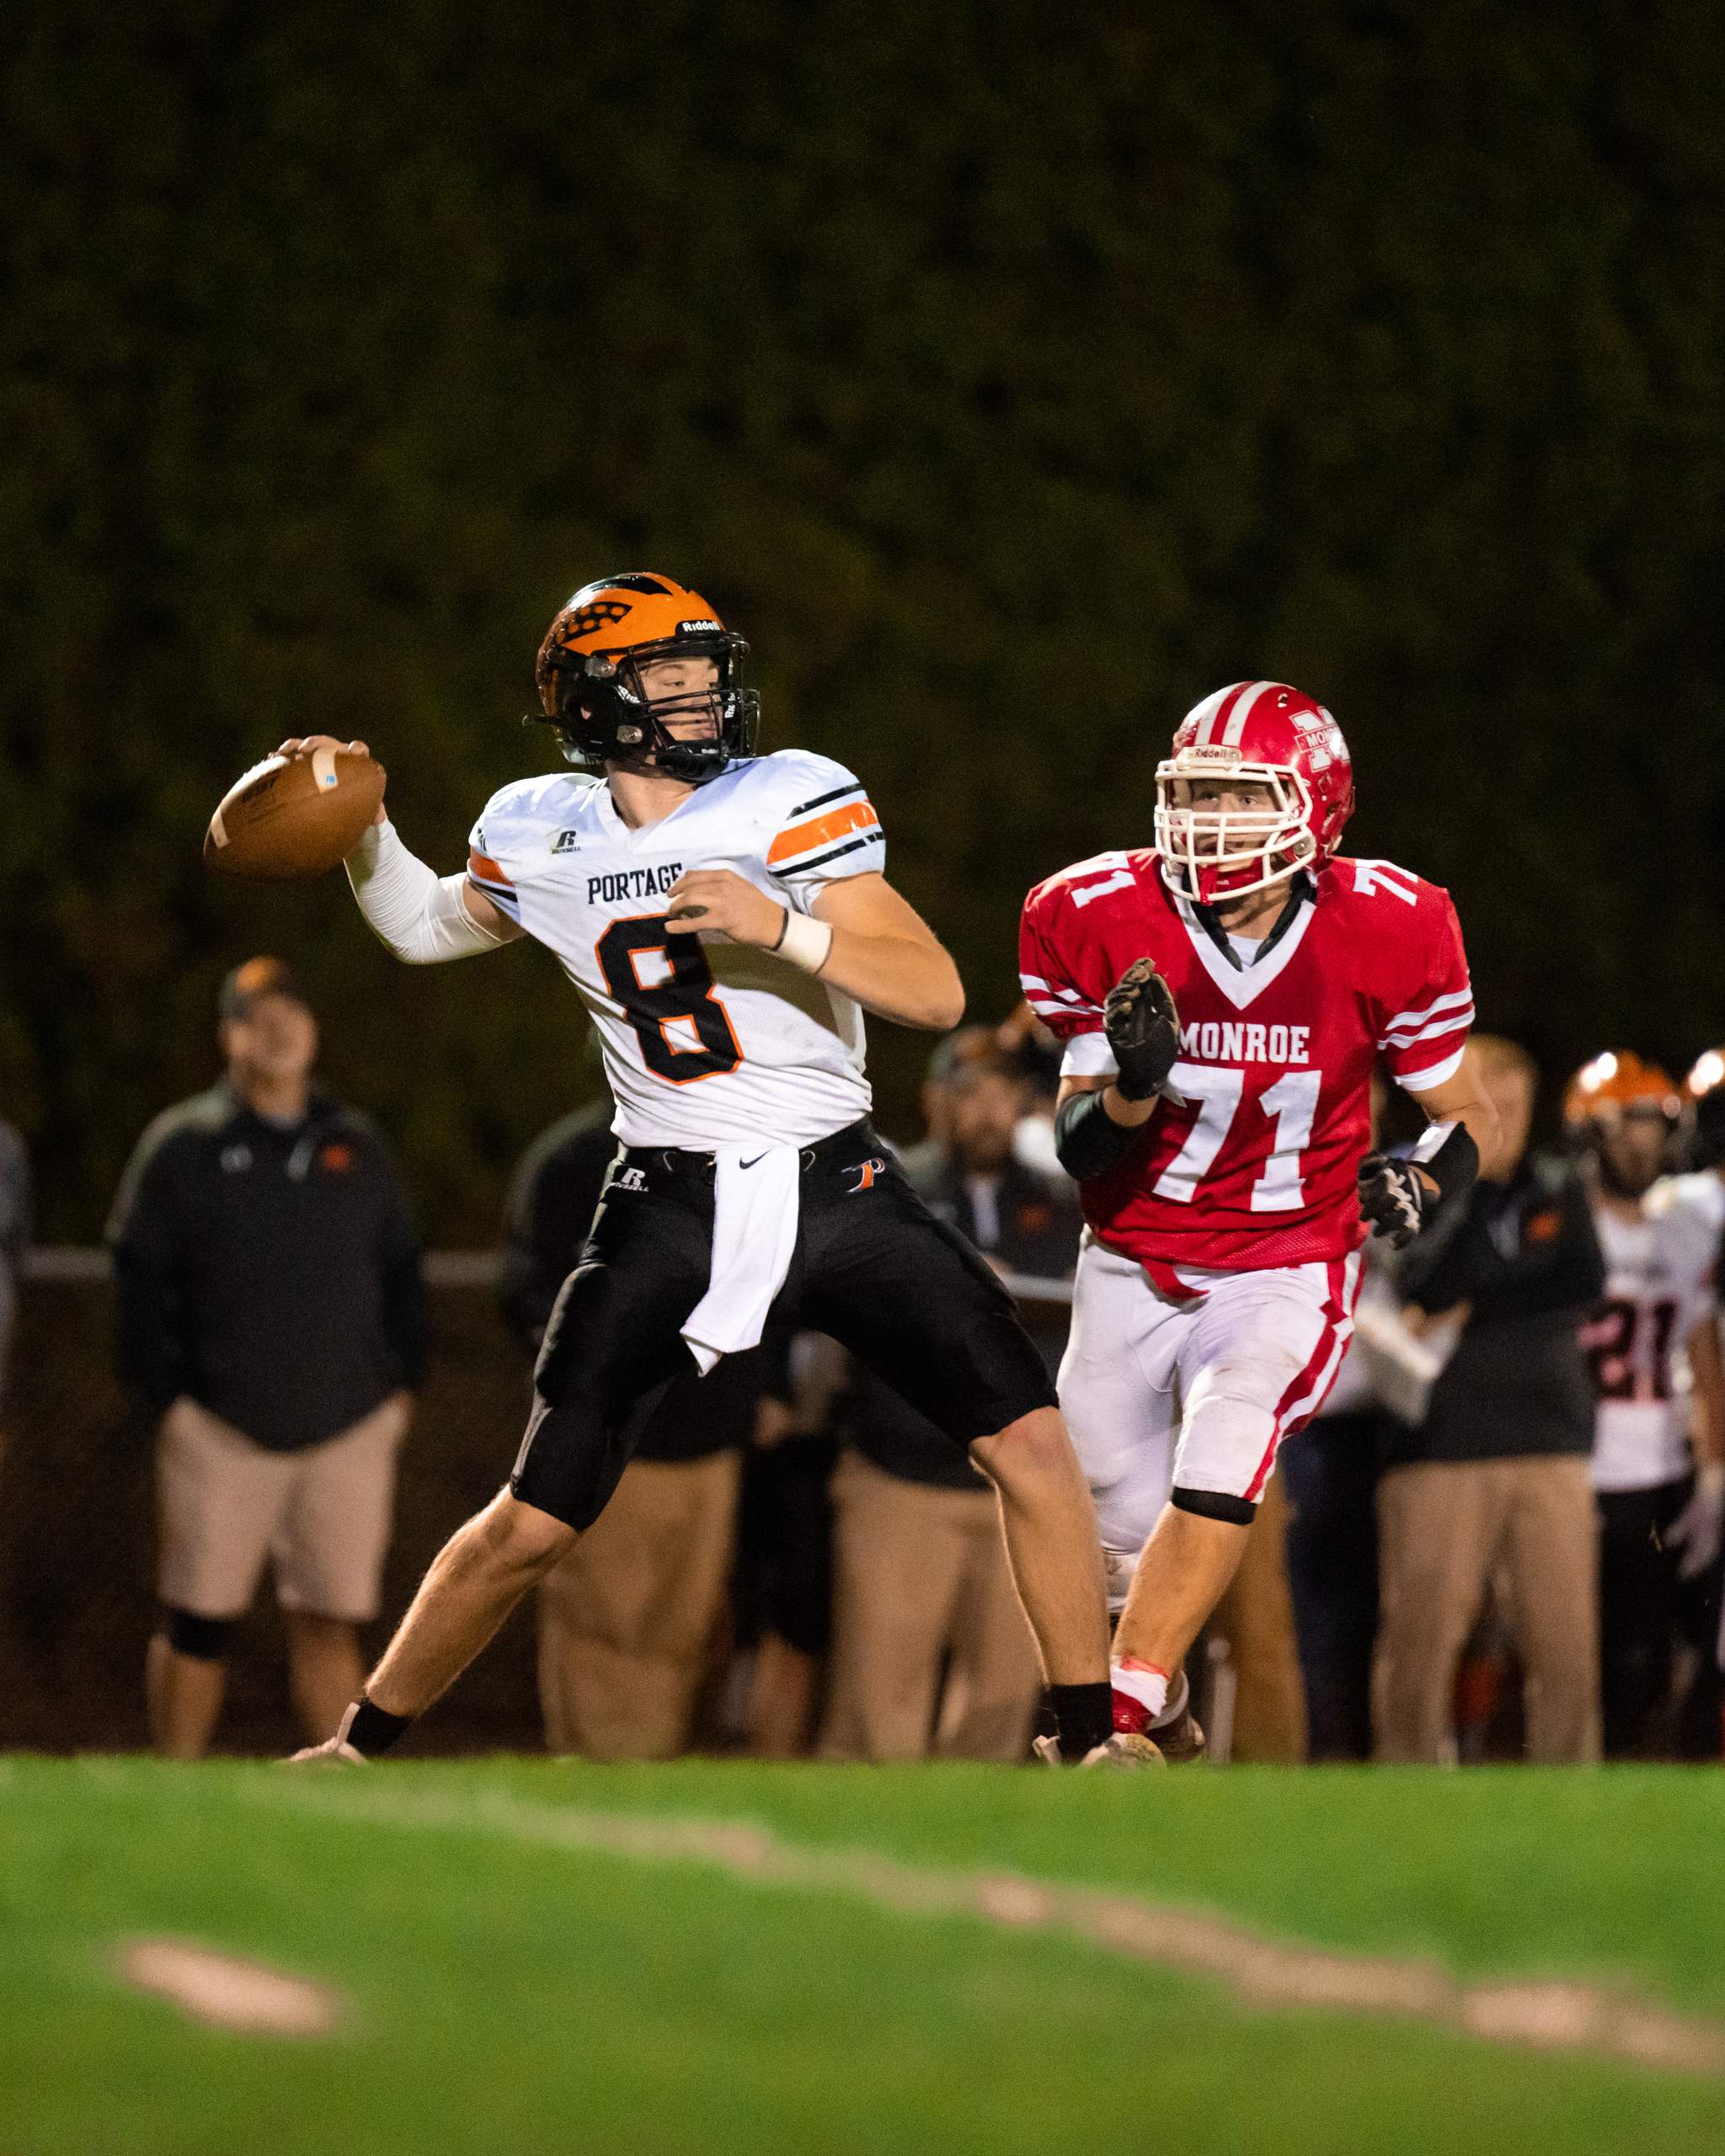 Monroe vs. Portage Round 1 of 2022 Playoffs, October 21st, 2022, photography by Ross Harried for Second Crop Sports